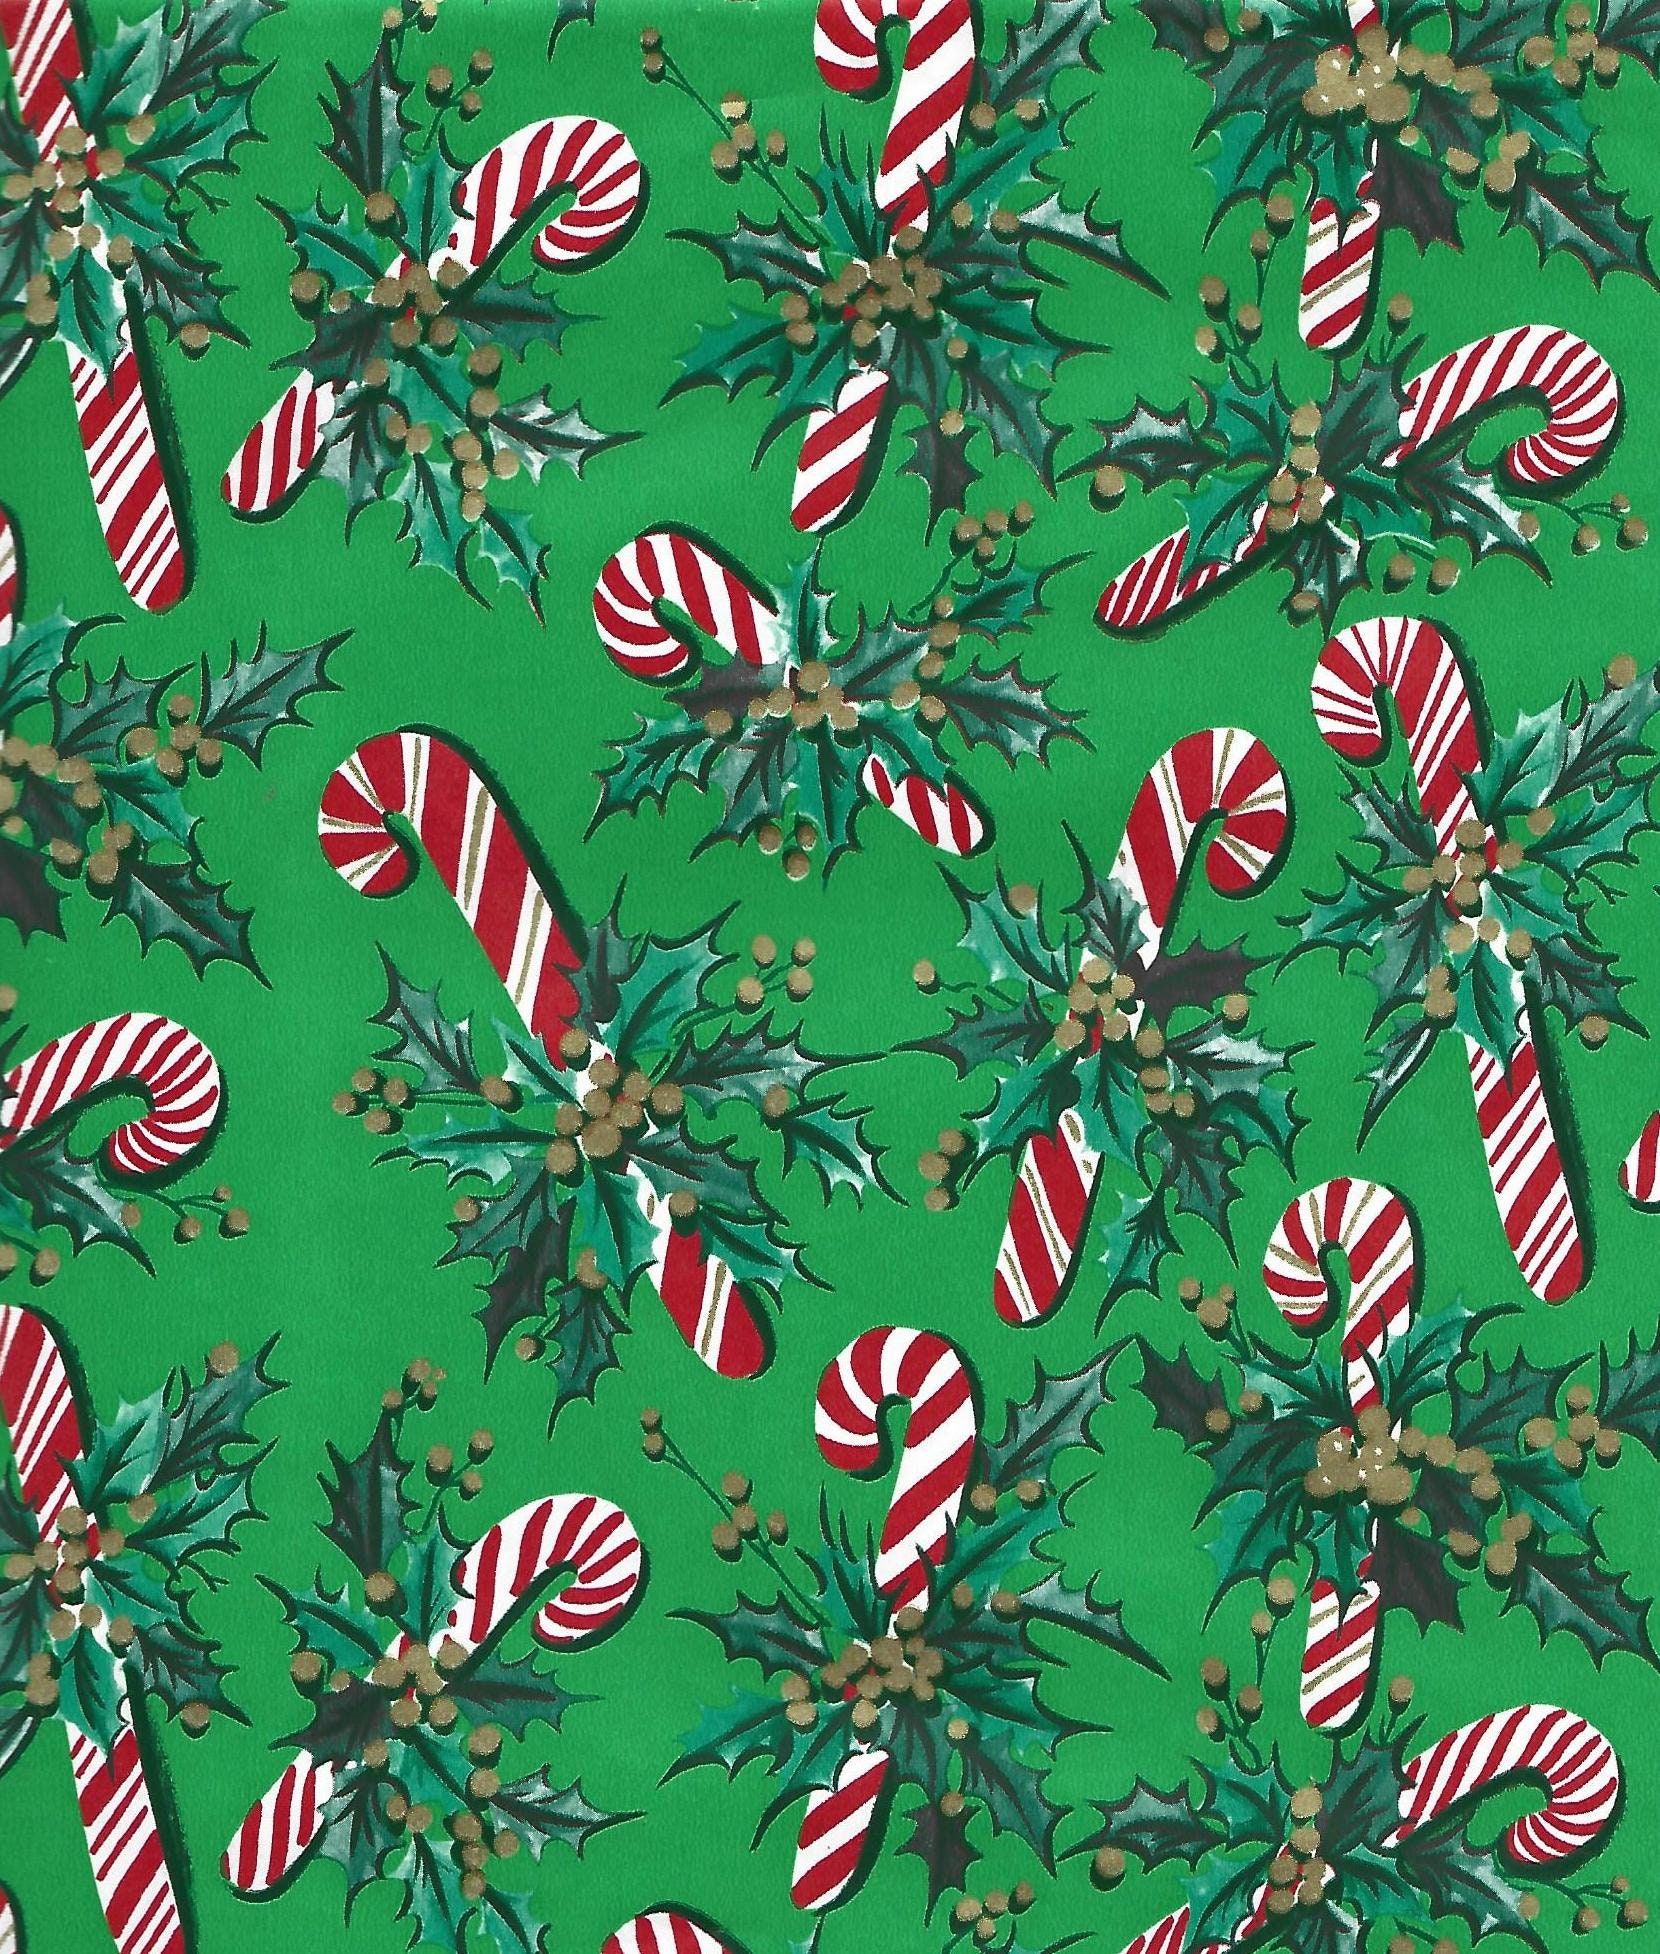 Large Dark Forest Green Candy Cane Stripes Wrapping Paper by PodArtist